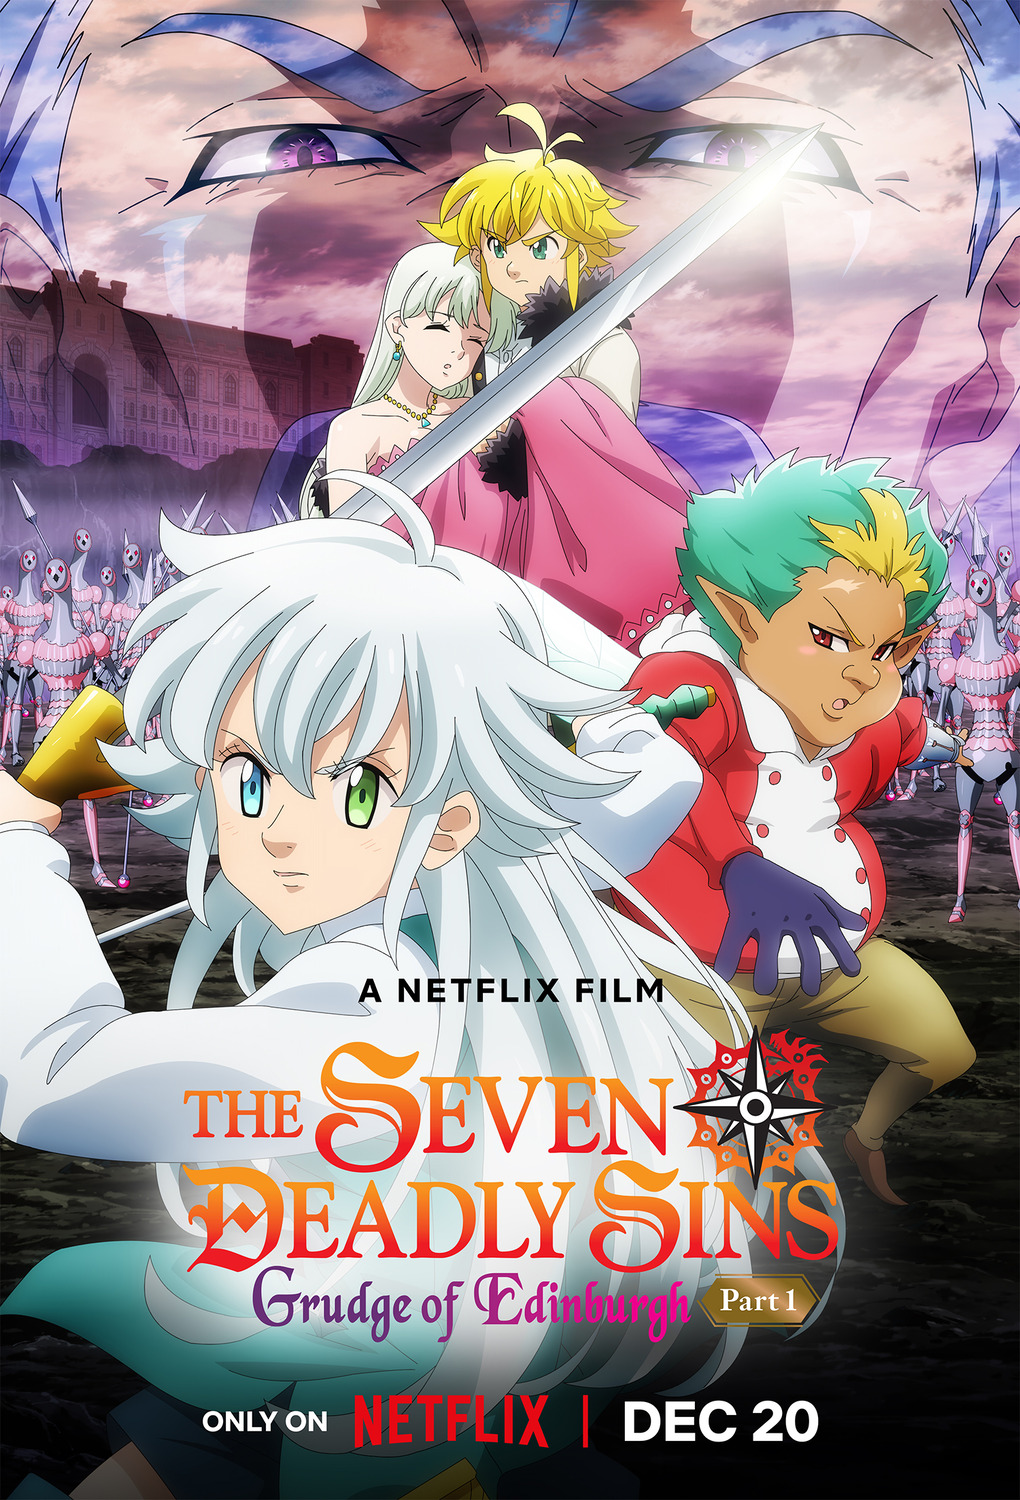 Extra Large Movie Poster Image for The Seven Deadly Sins: Grudge of Edinburgh Part 1 (#2 of 2)